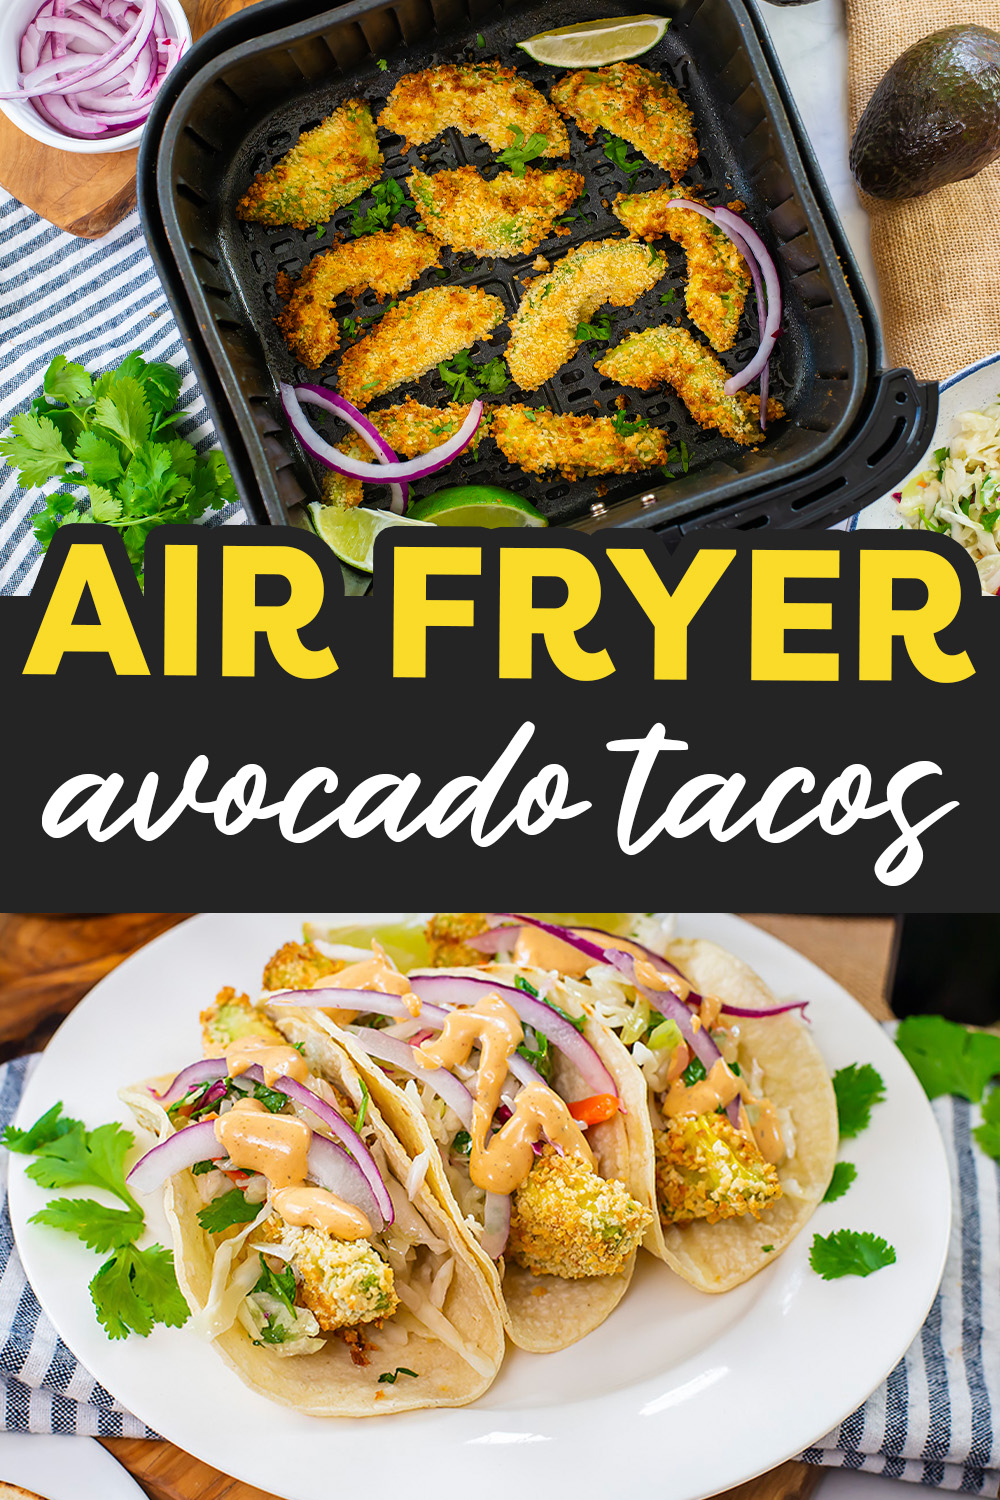 These air fryer avocado tacos are a great vegetarian taco option that provides a great texture and taste to your taco!